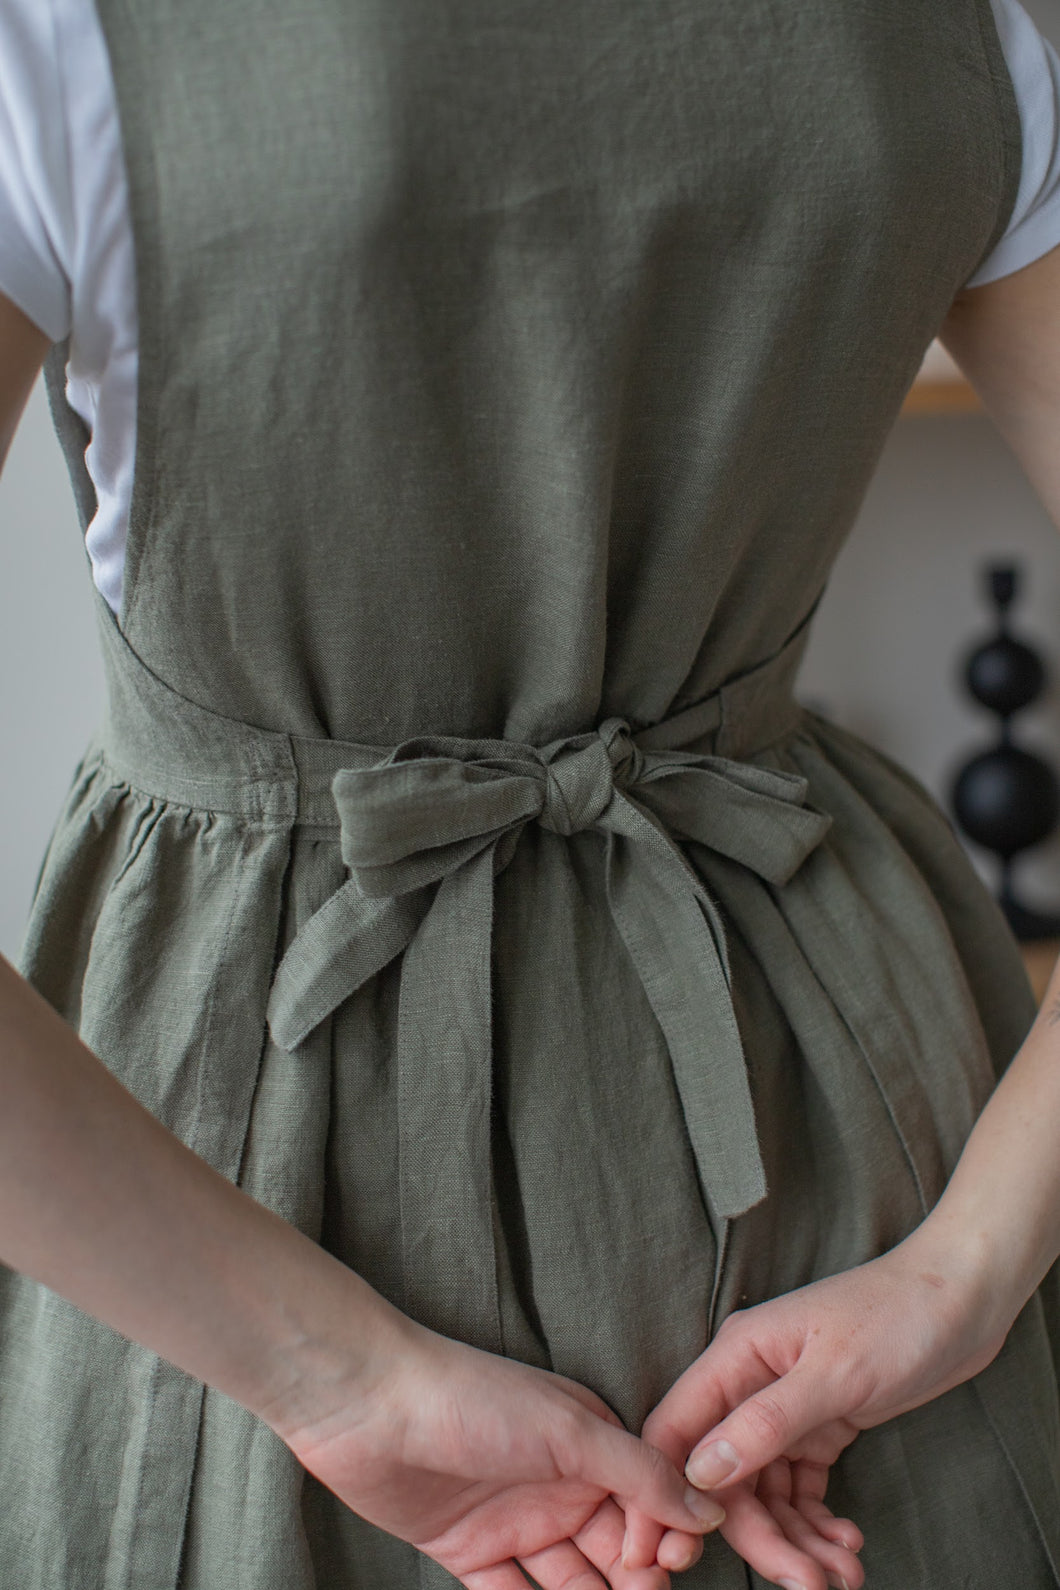 100% Linen Cottage Dress Apron in Thyme